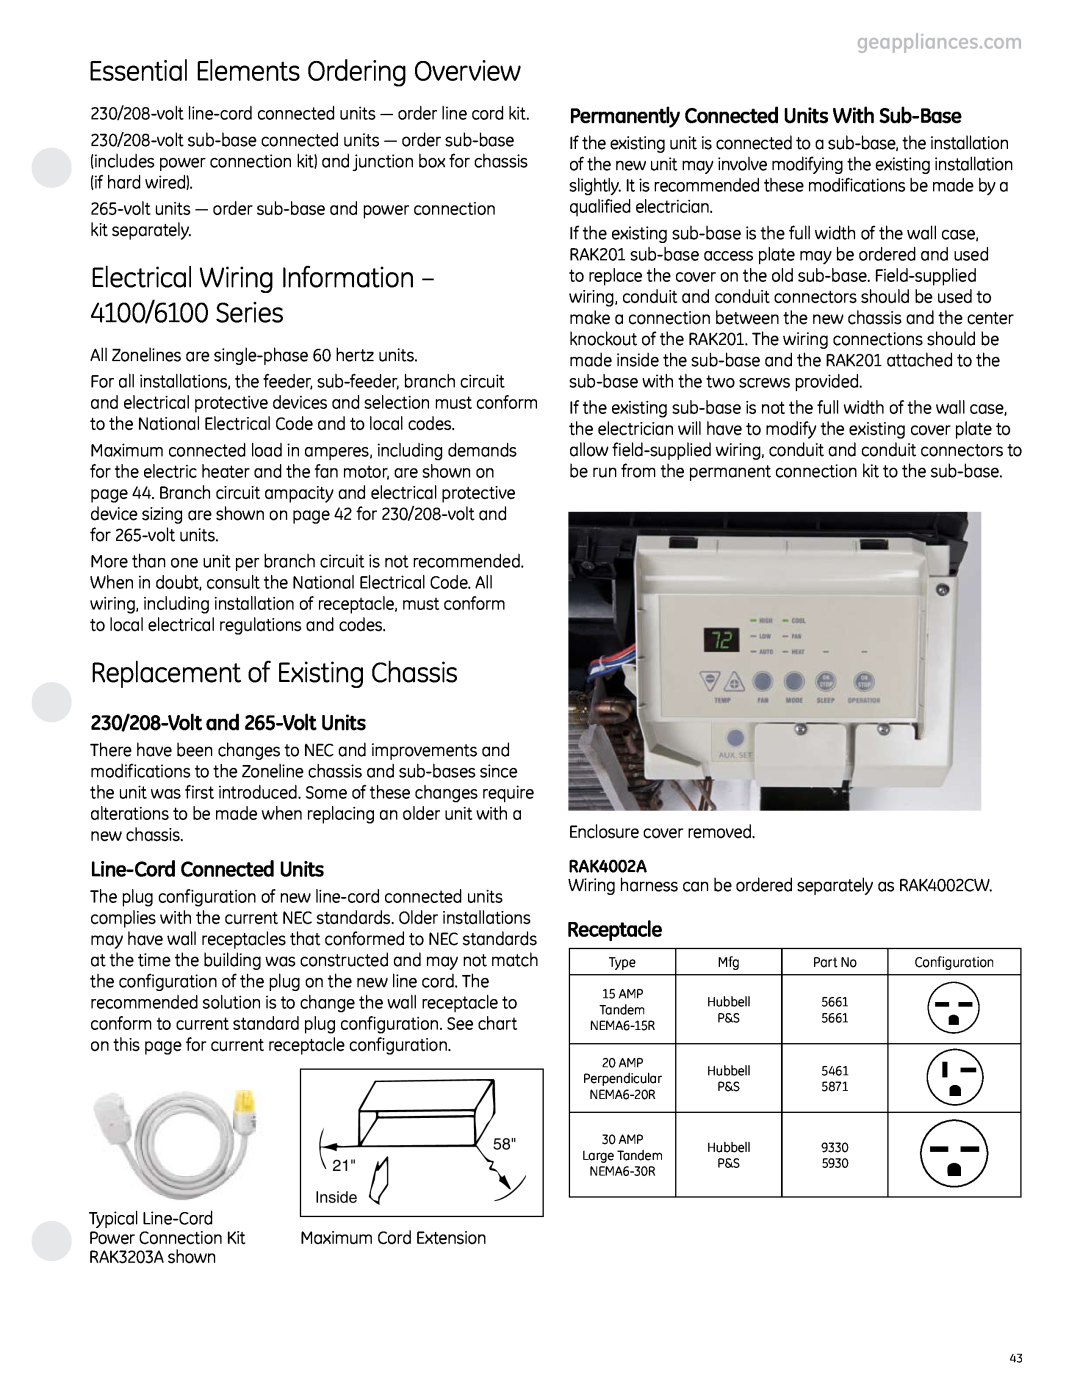 GE Essential Elements Ordering Overview, Electrical Wiring Information - 4100/6100 Series, Line-CordConnected Units 